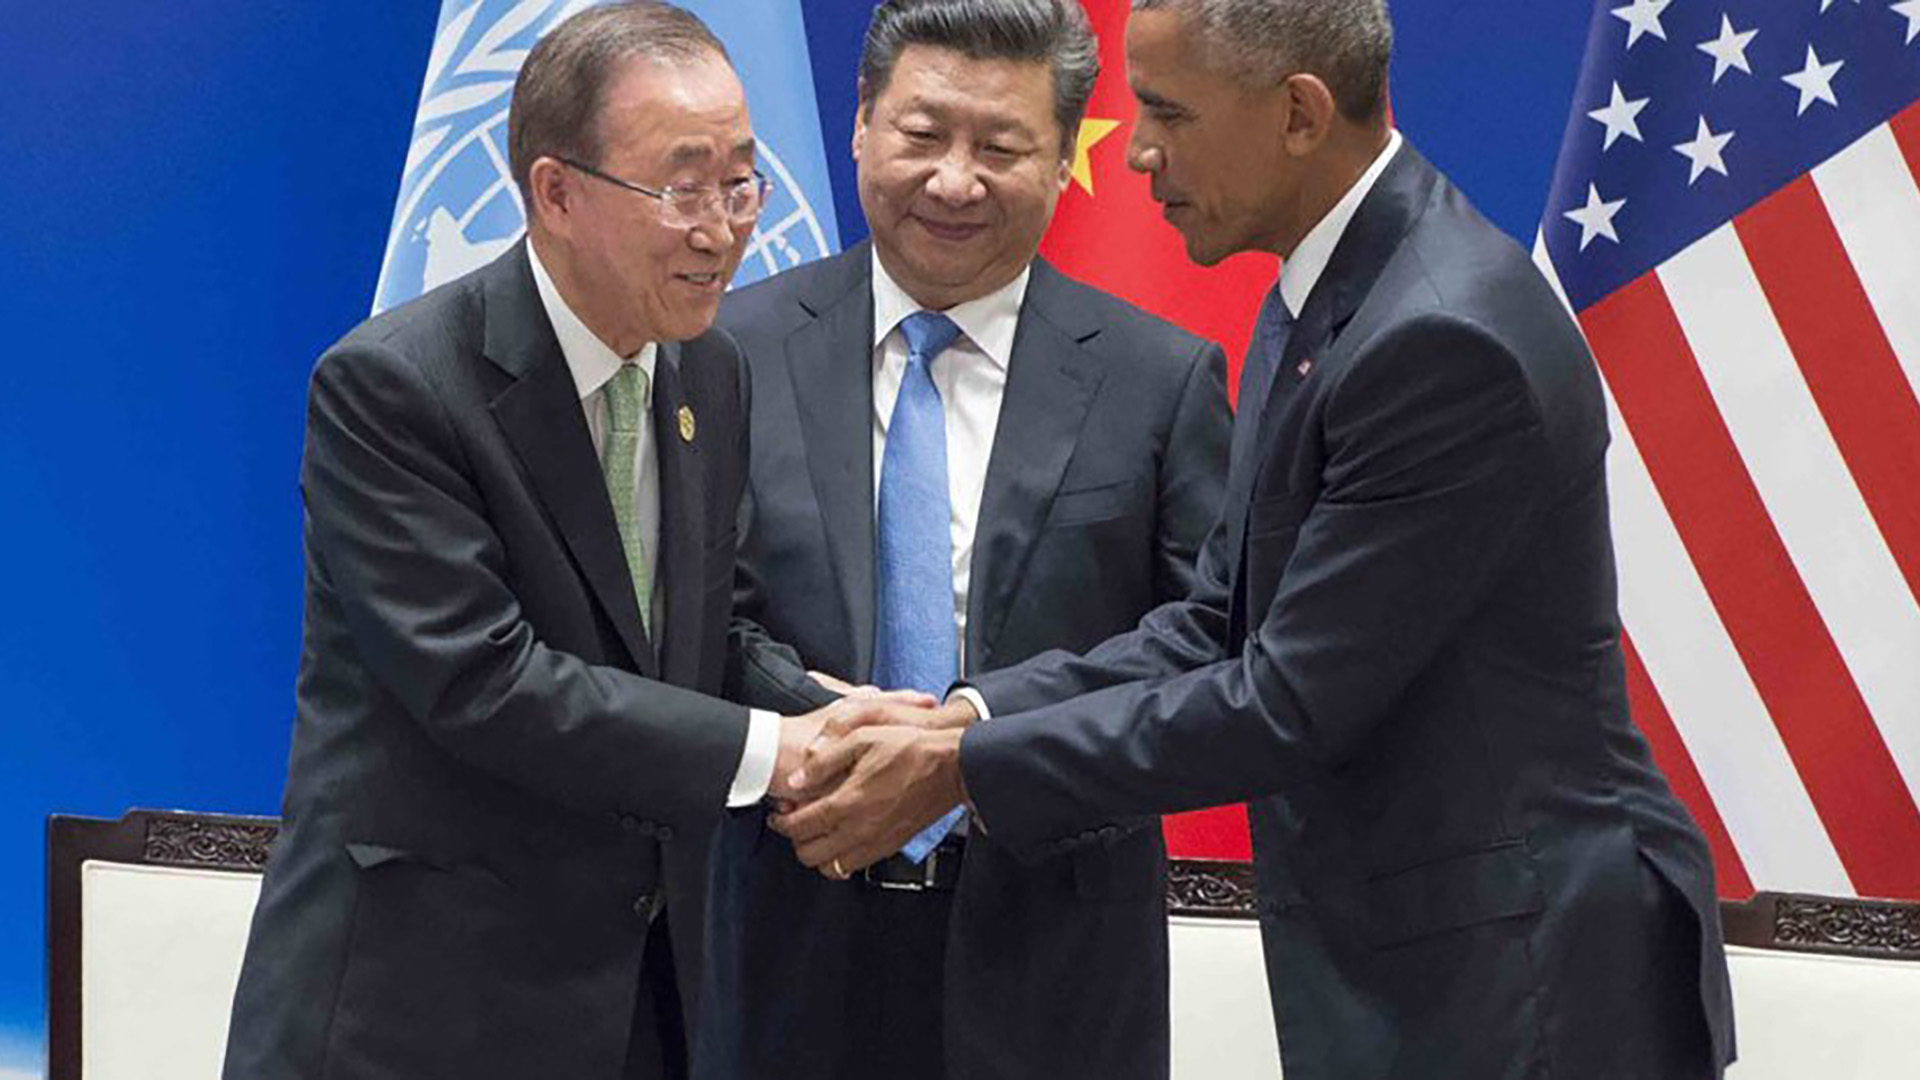 Xi Jinping and Barack Obama during the Paris Climate Agreement